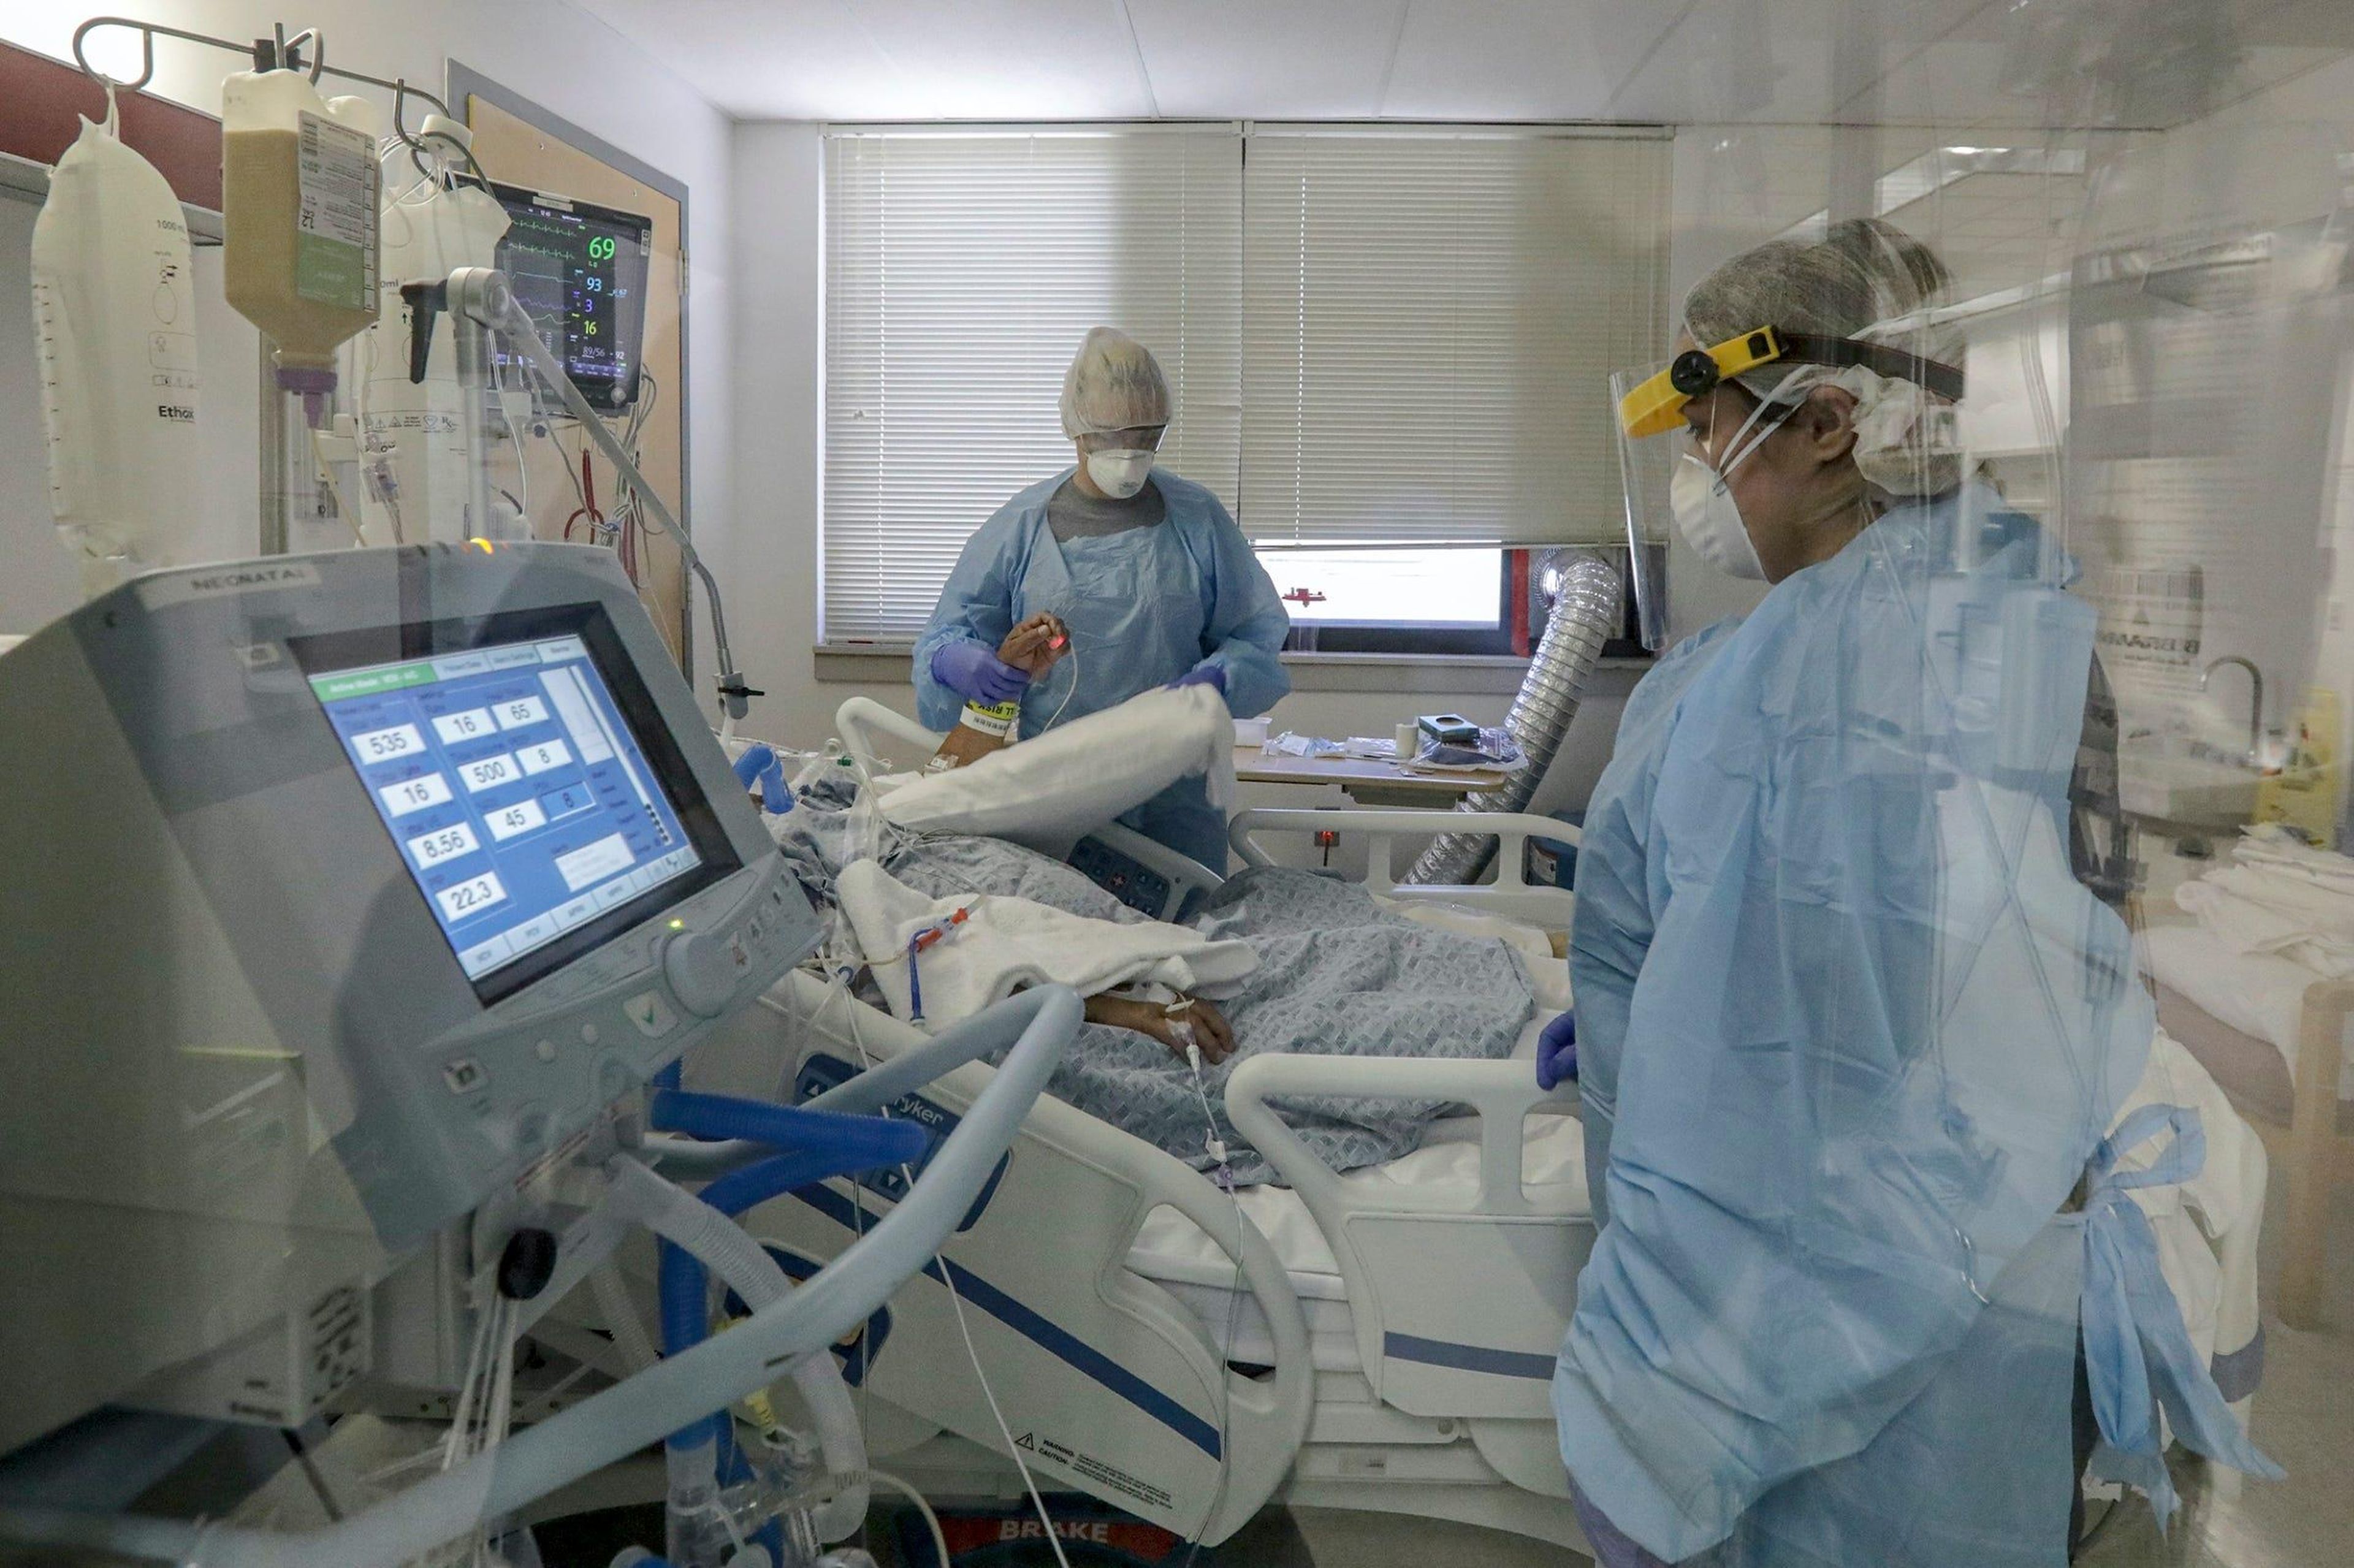 Nurses attend to a COVID-19 patient on ventilator at Desert Valley Medical Group. Victorville, CA.